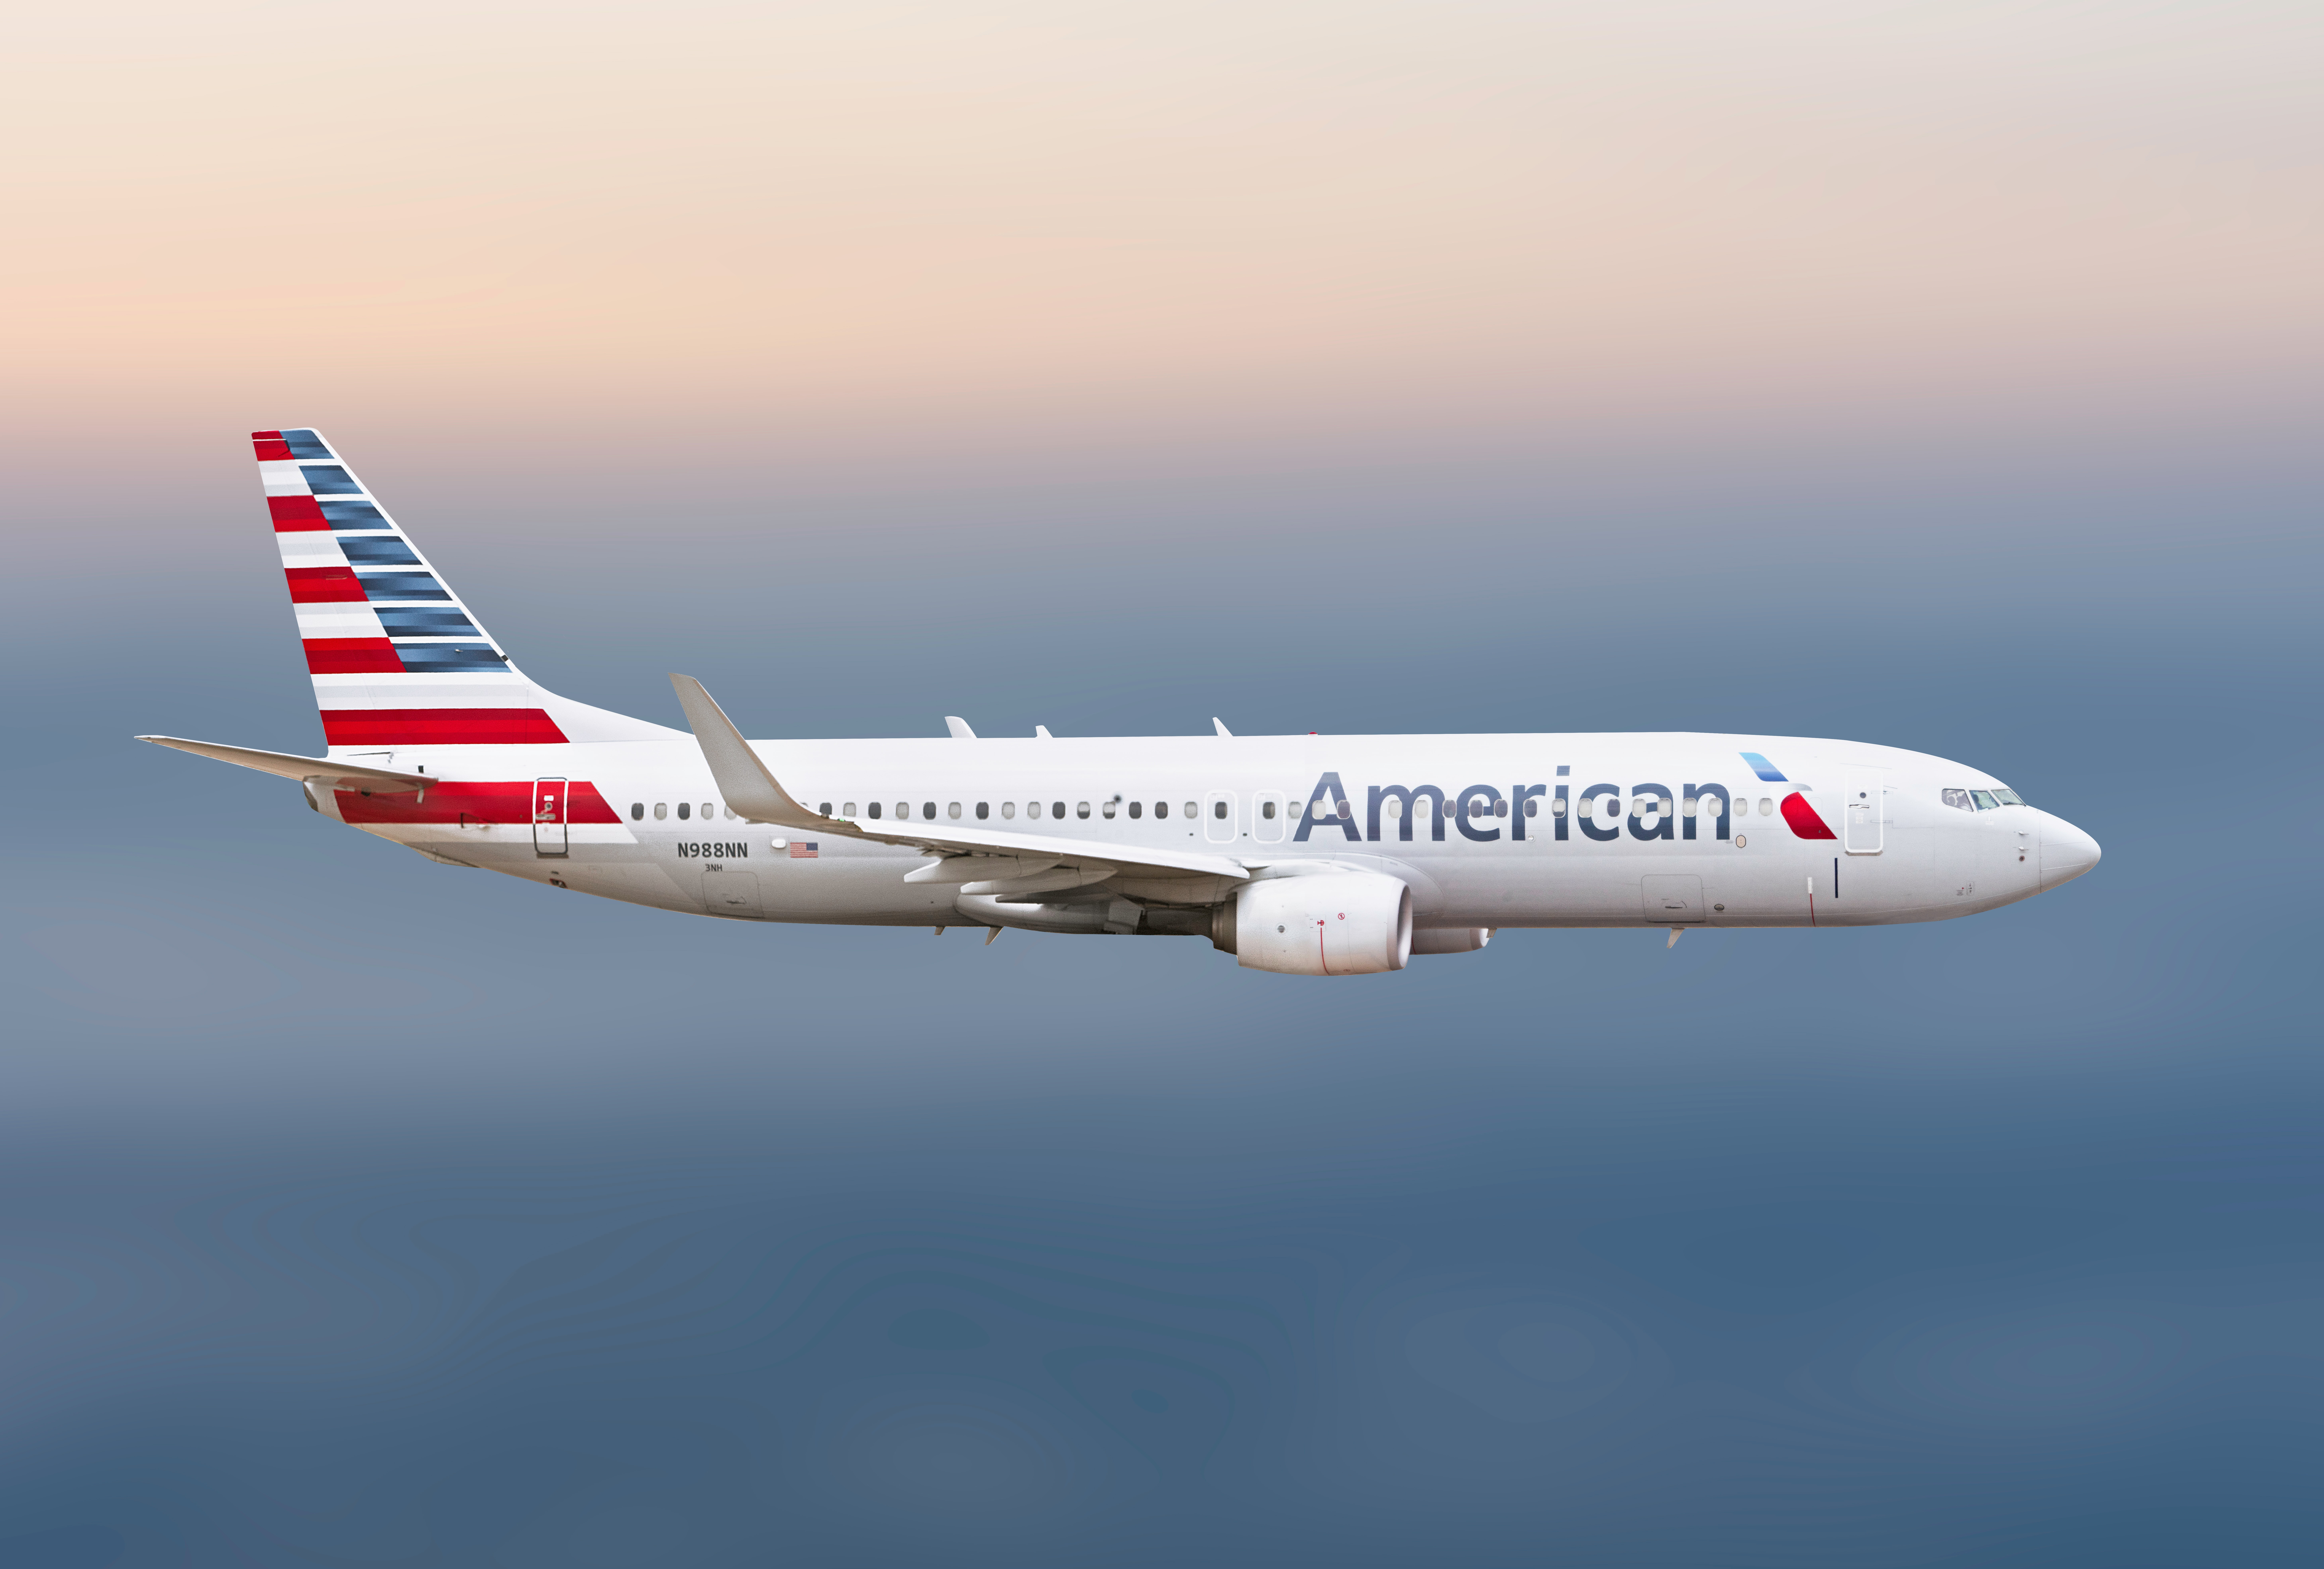 Is an American Airlines devaluation just a matter of time?